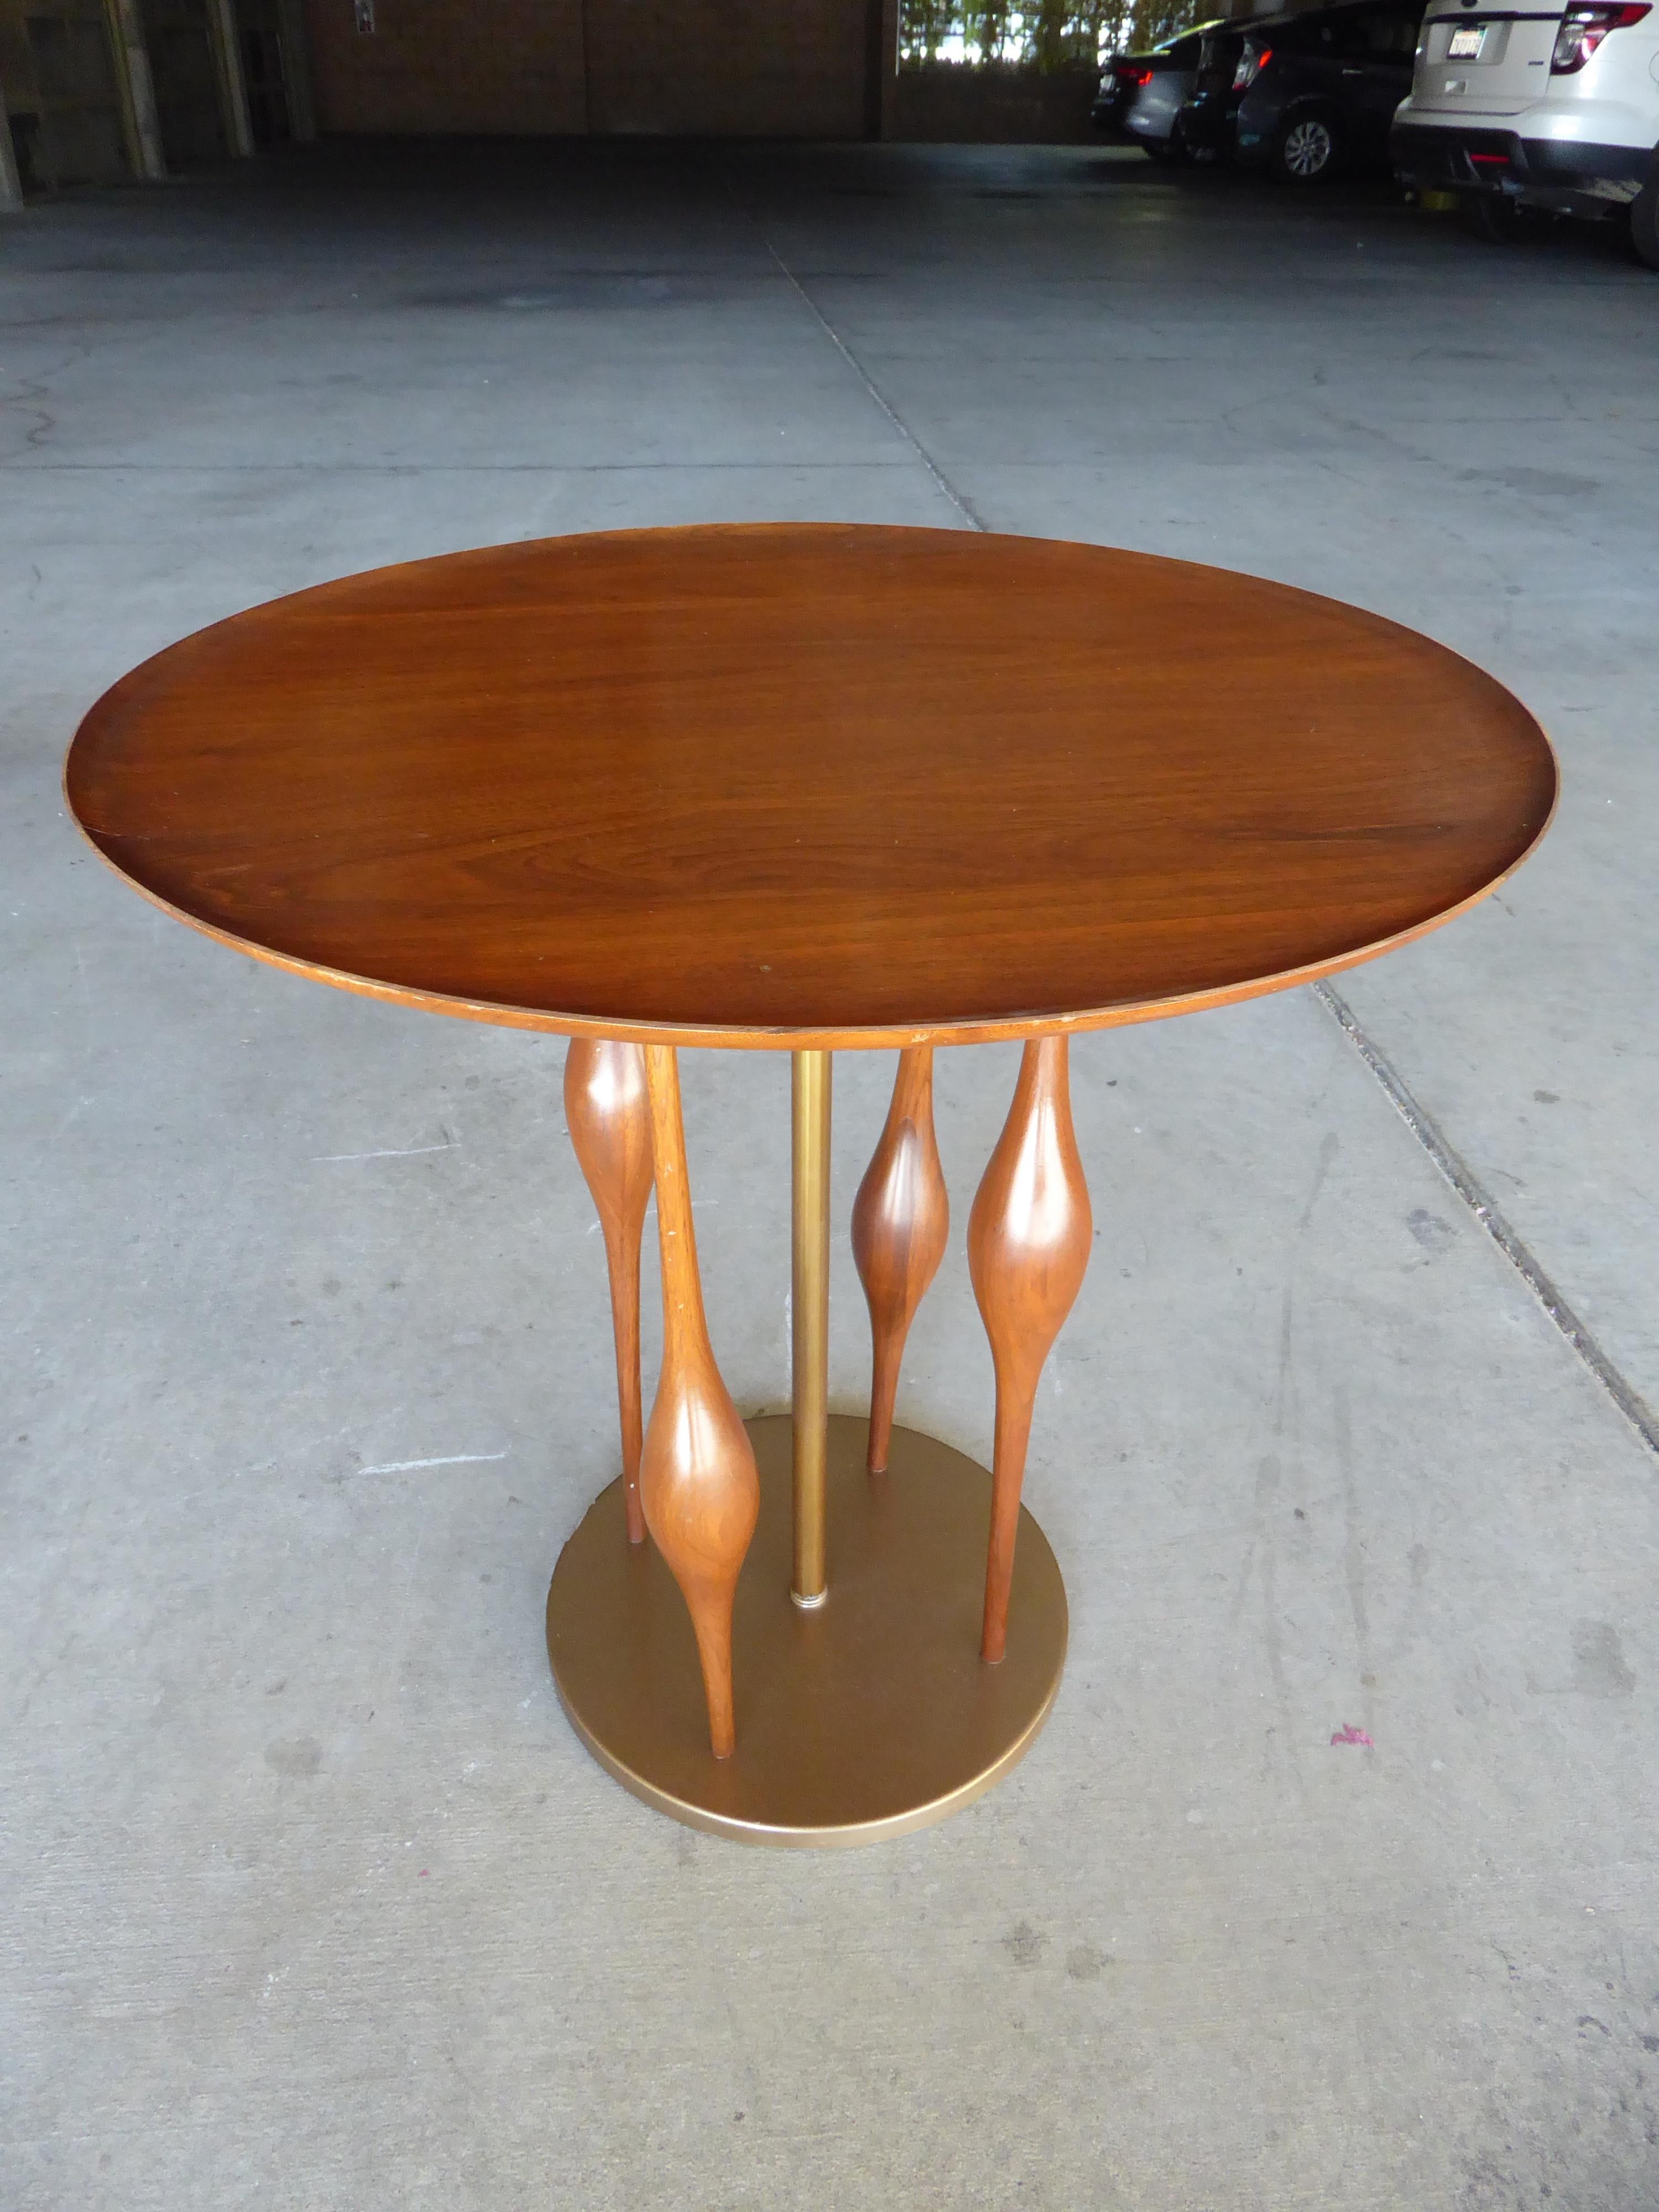 Mid-Century Modern Walnut and Brass Side Table Attributed to Modeline of California